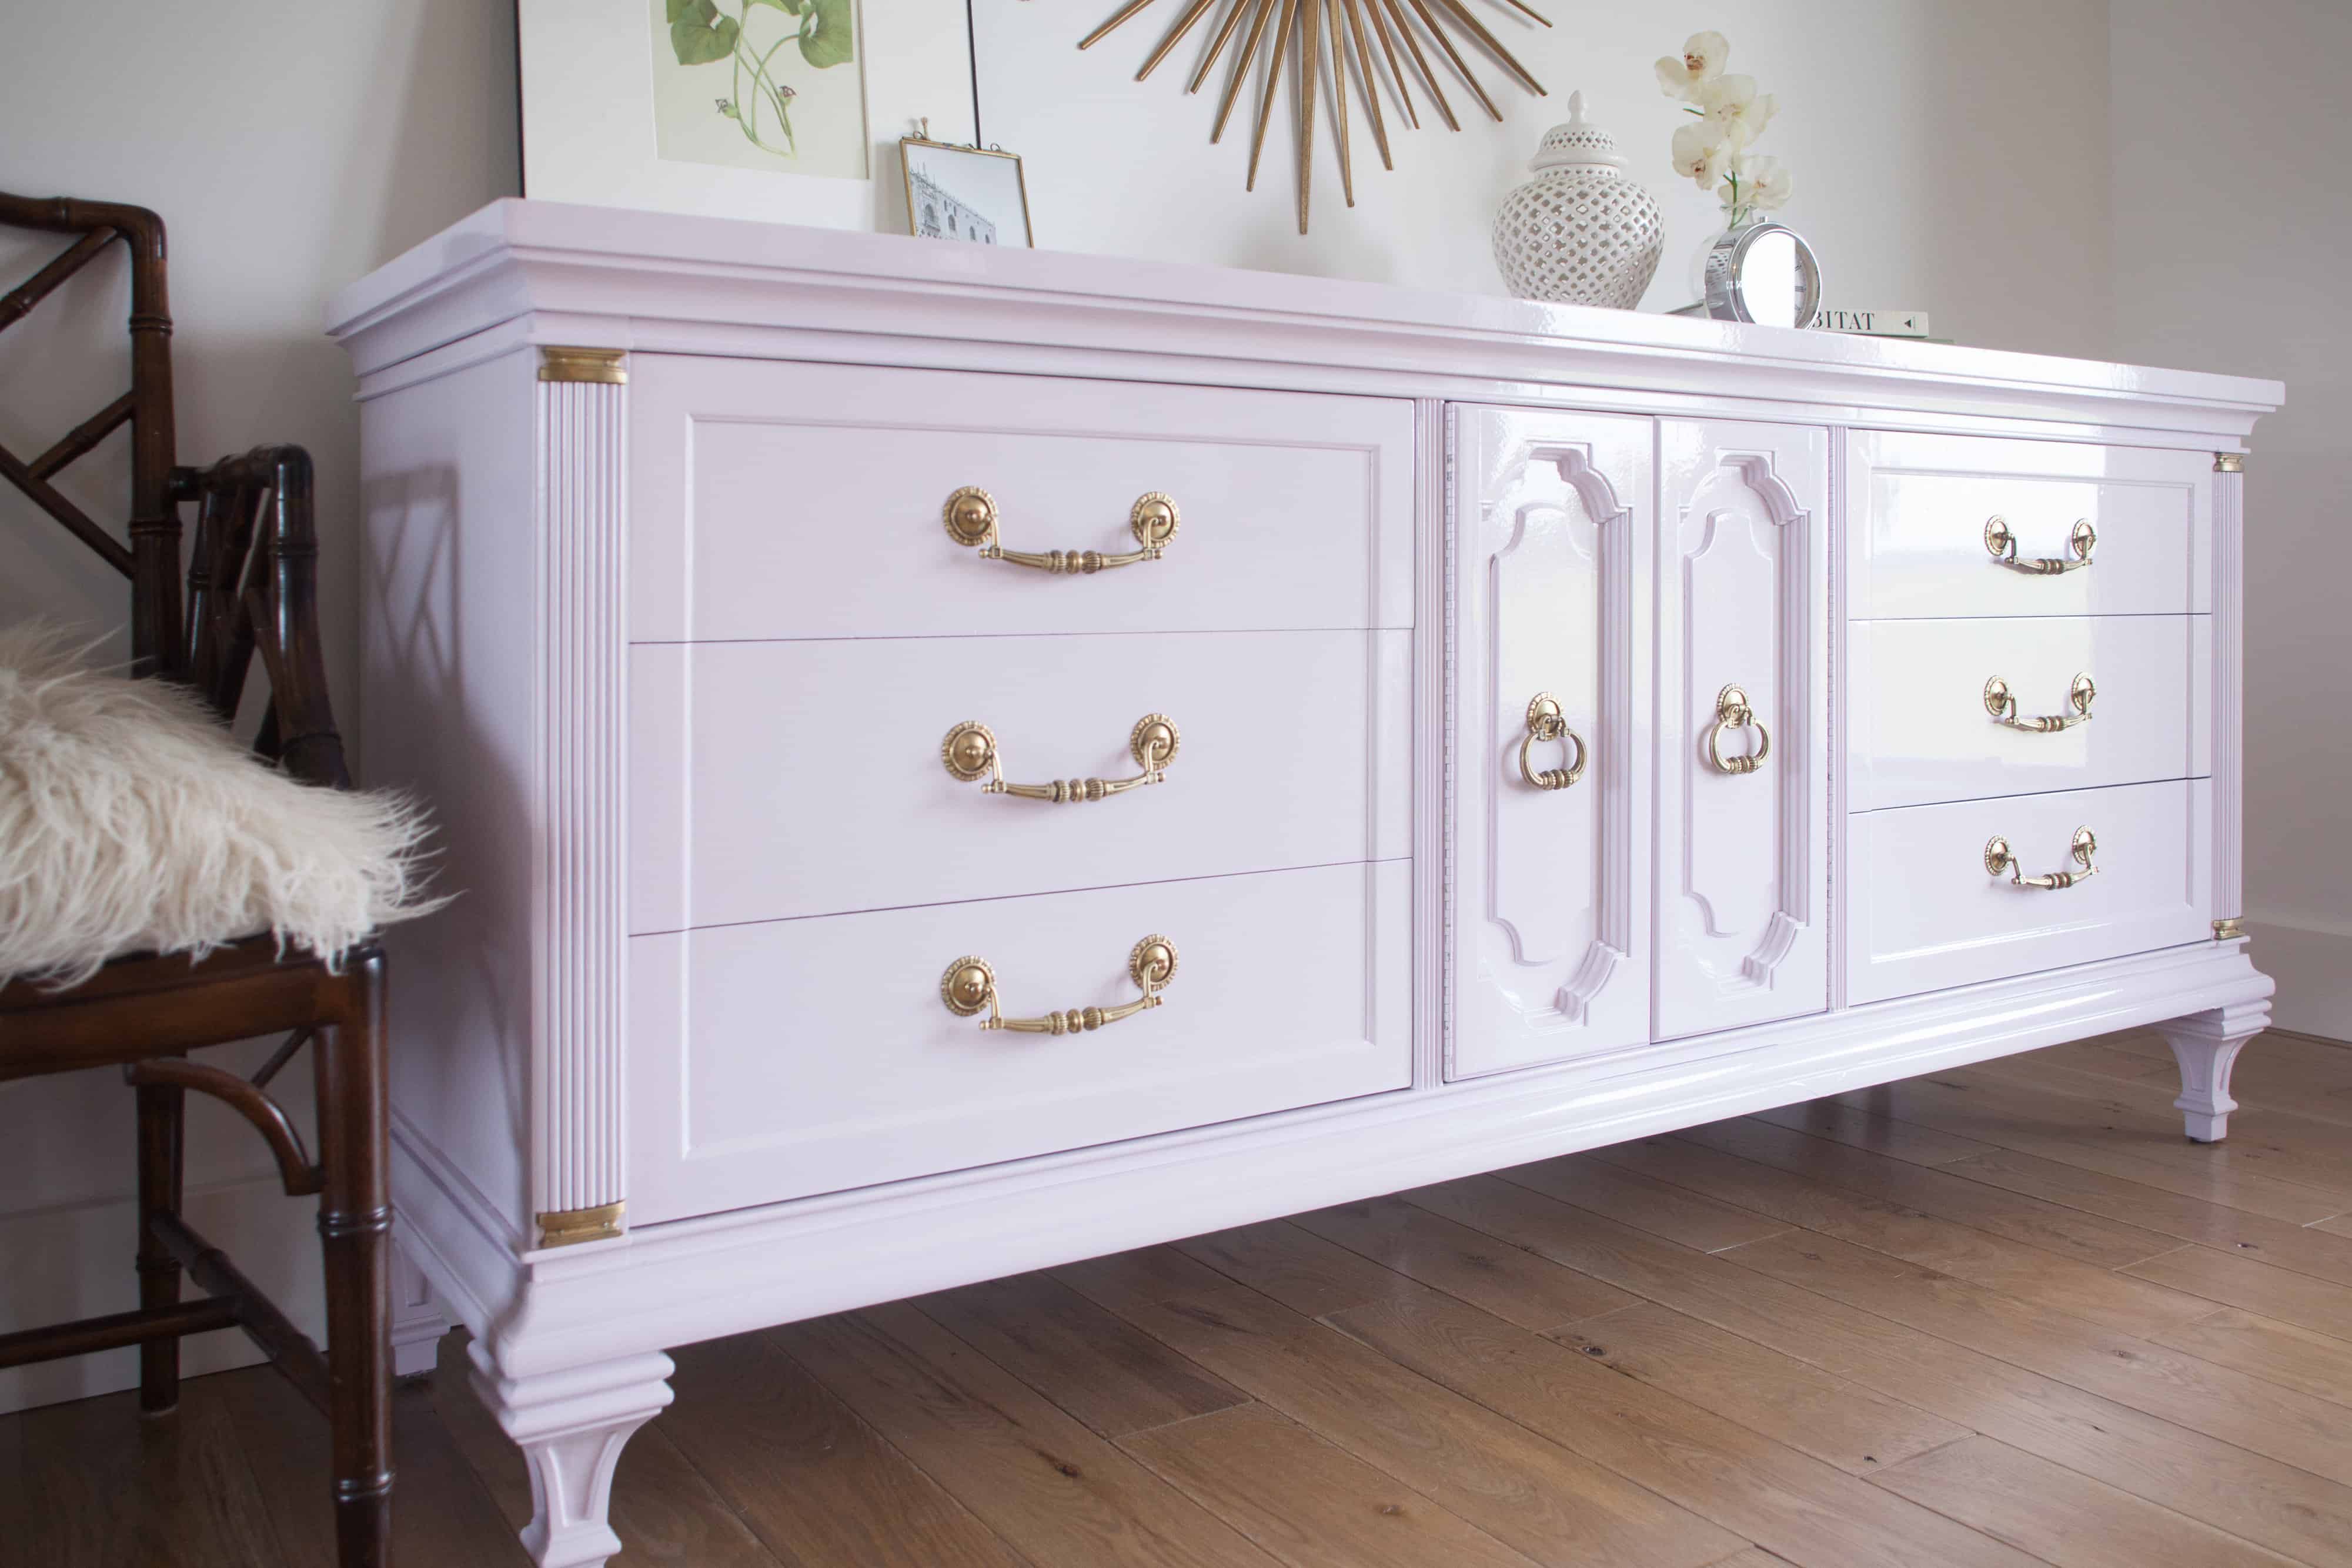 Vintage dresser refinished in high gloss lilac. Perfect for a chic nursery!